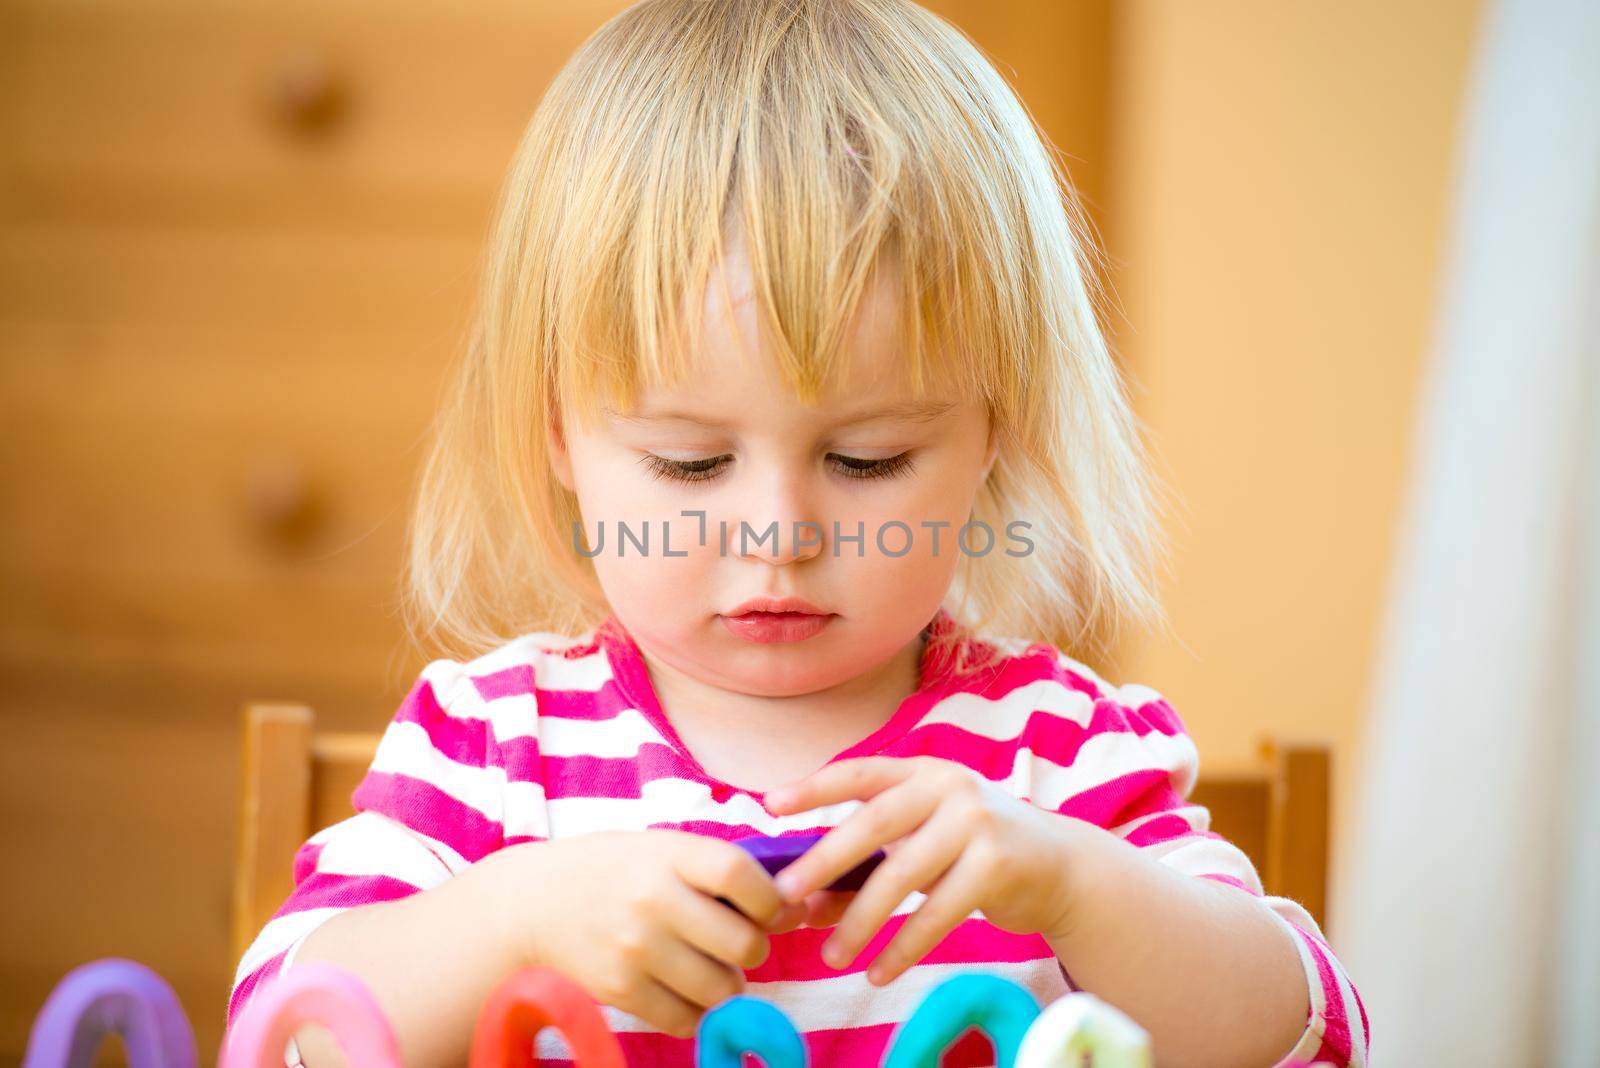 Little girl playing with plasticine by GekaSkr